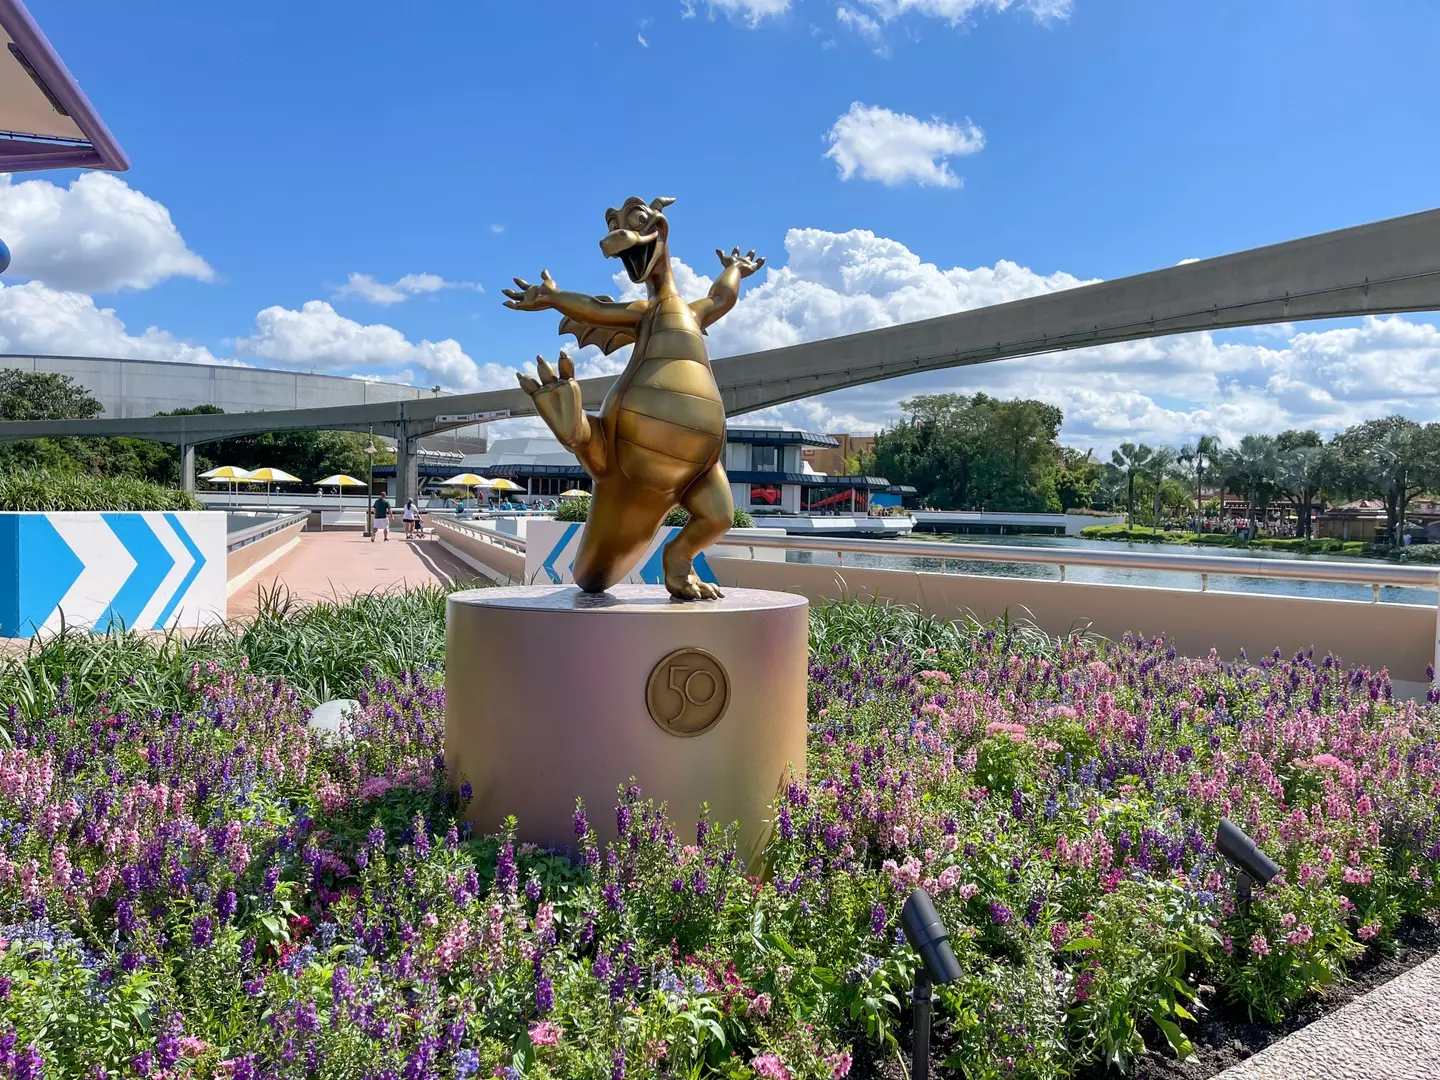 Figment is a mascot at Disney's Epcot.